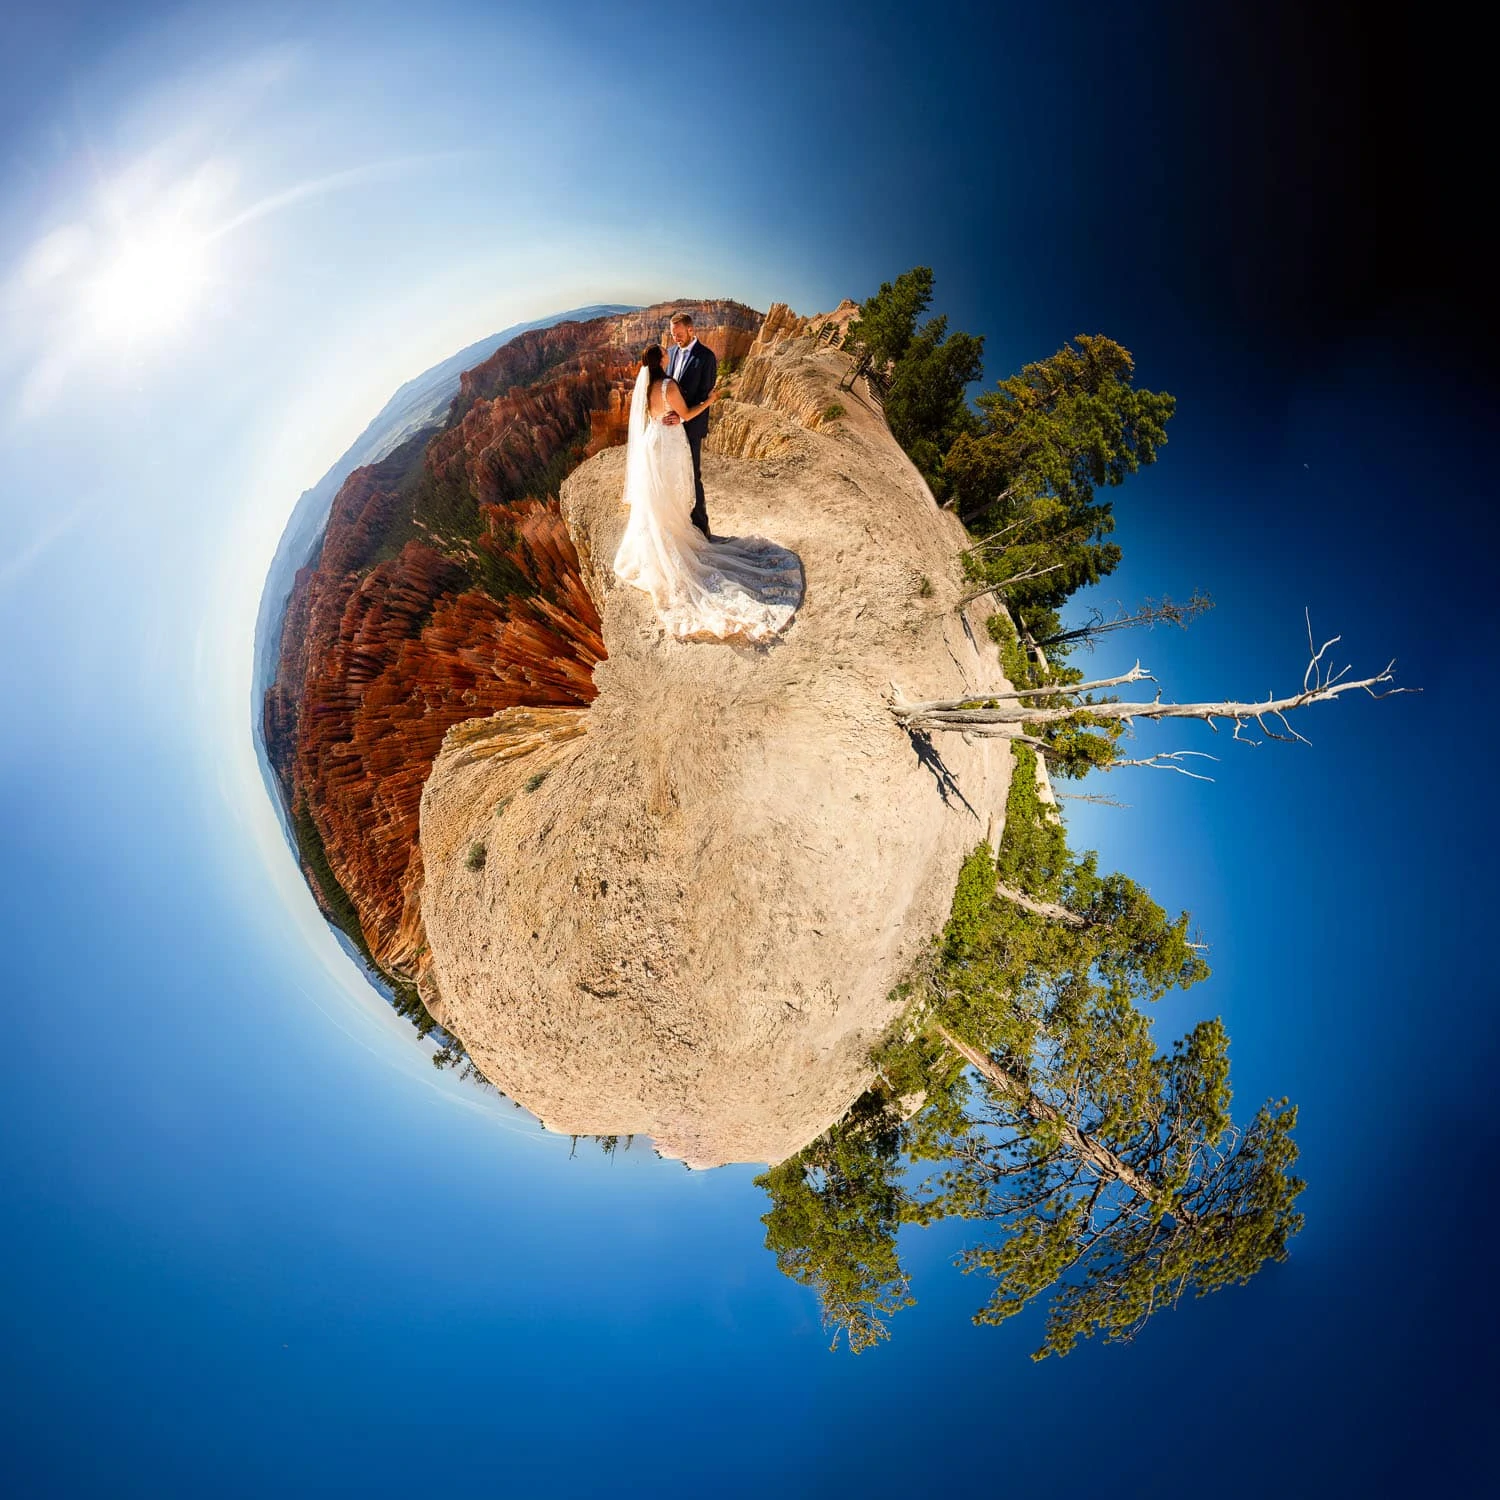 A tiny planet taken in Bryce Canyon in Utah.